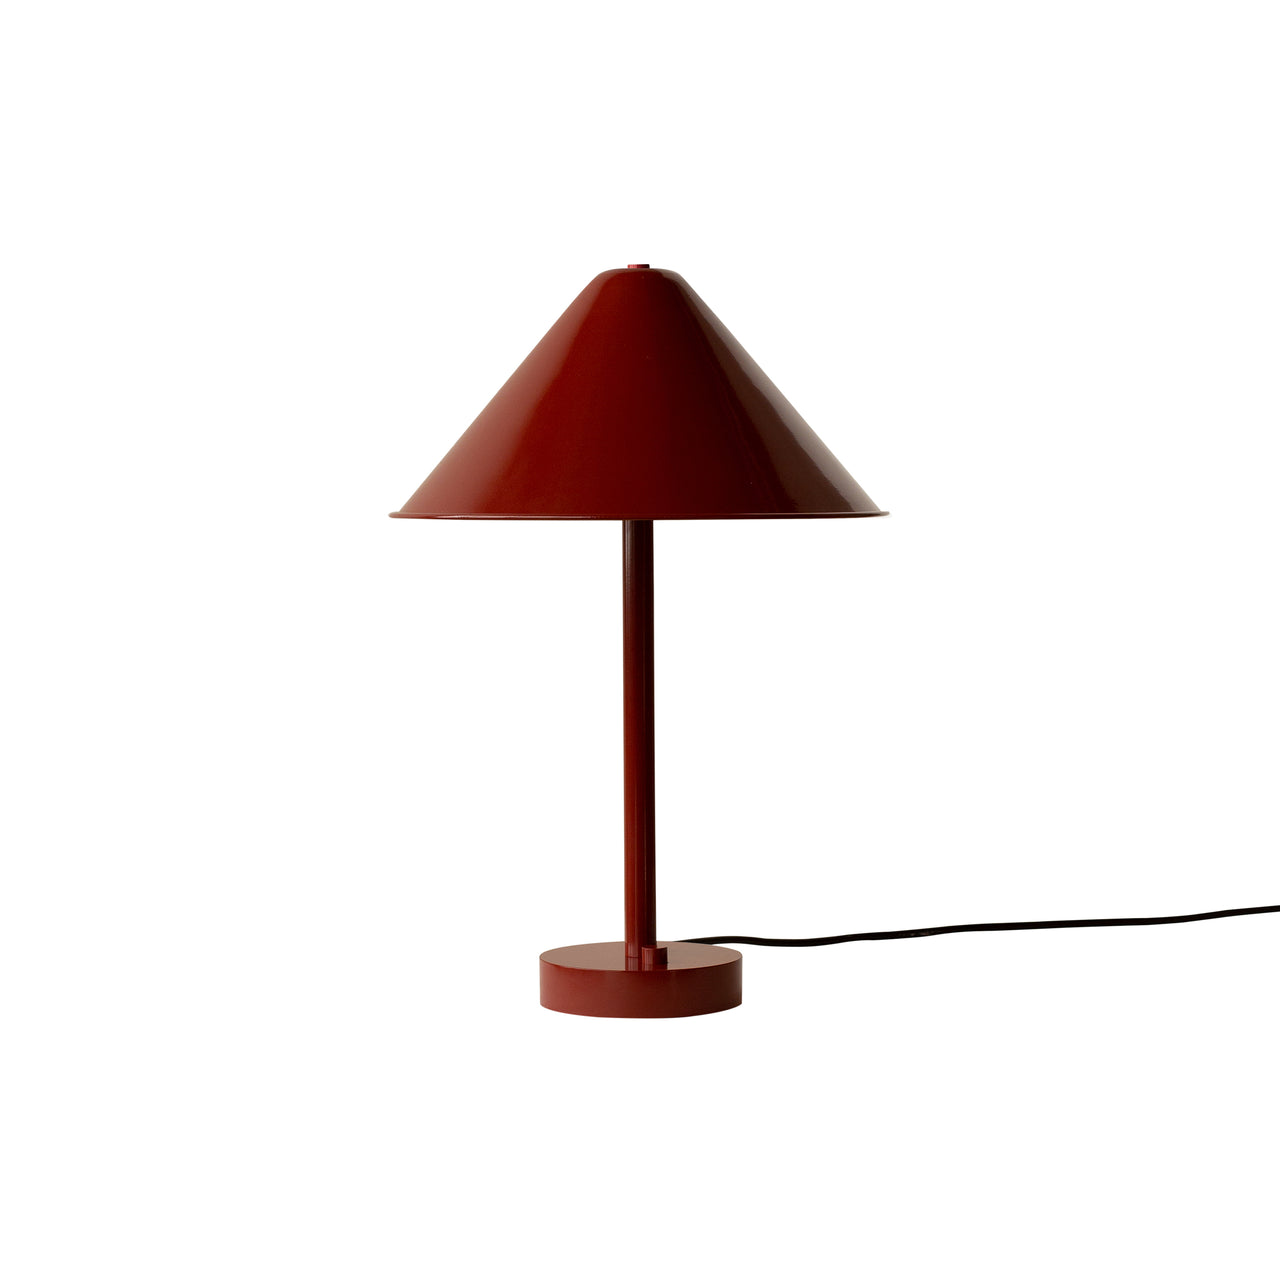 Tipi Table Lamp: Oxide Red + Oxide Red